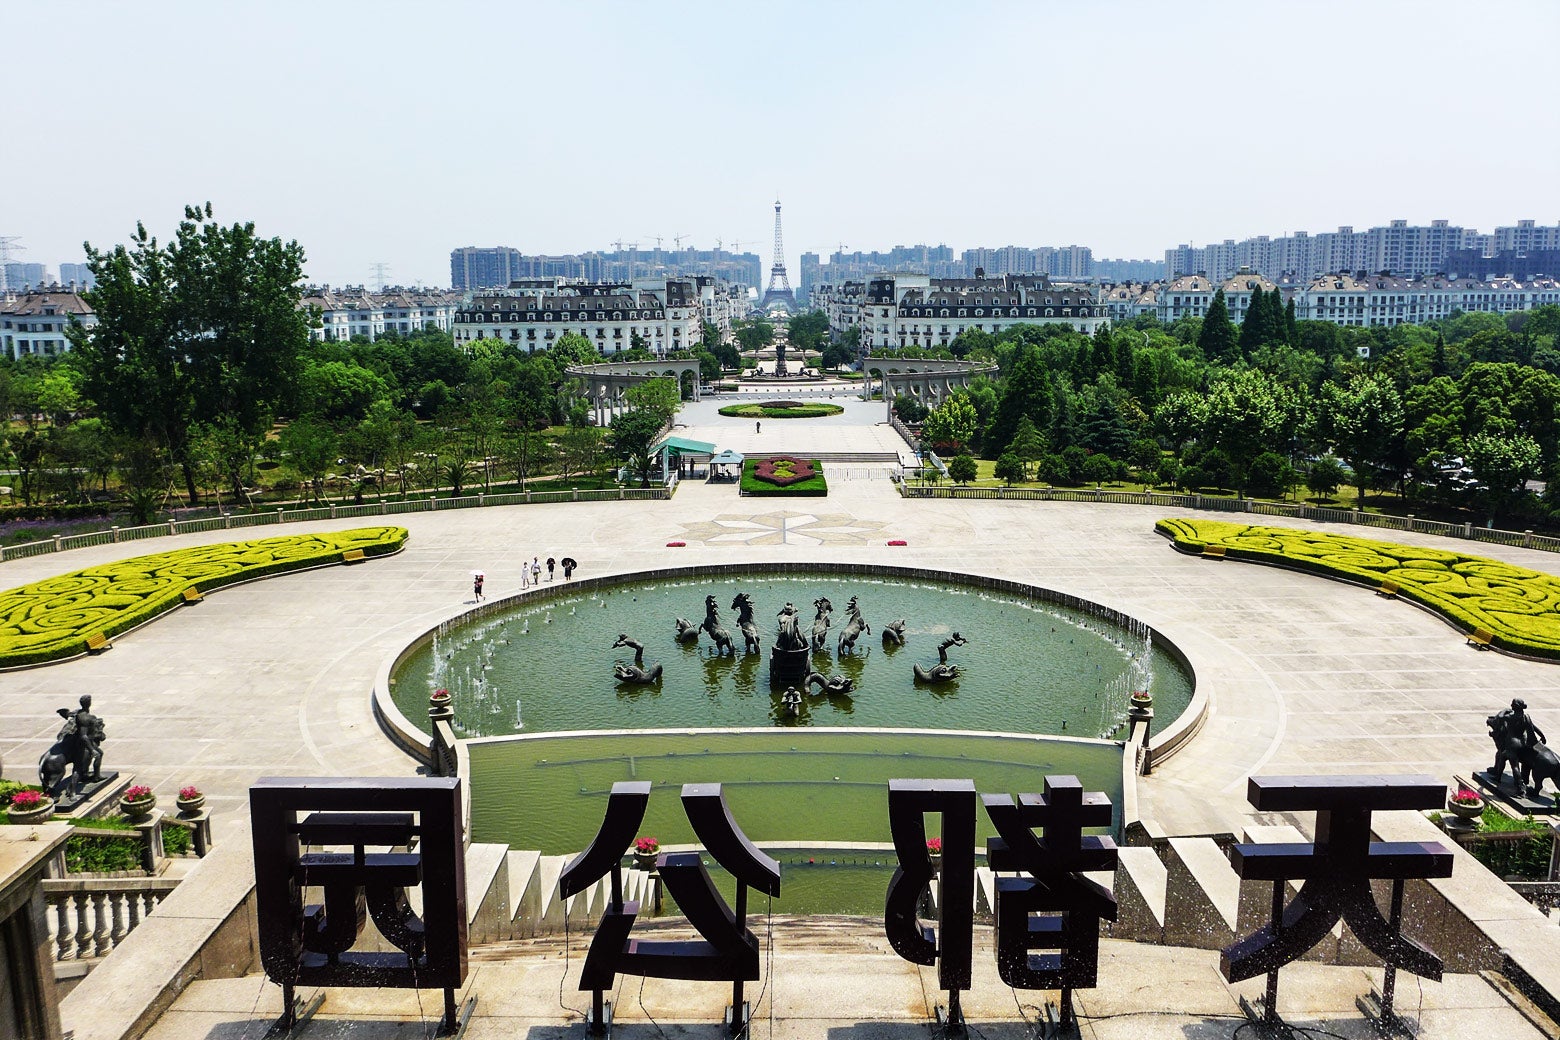 Overlooking Hangzhou’s Sky City, with views of its parterre gardens, many fountains, and iconic Eiffel Tower.